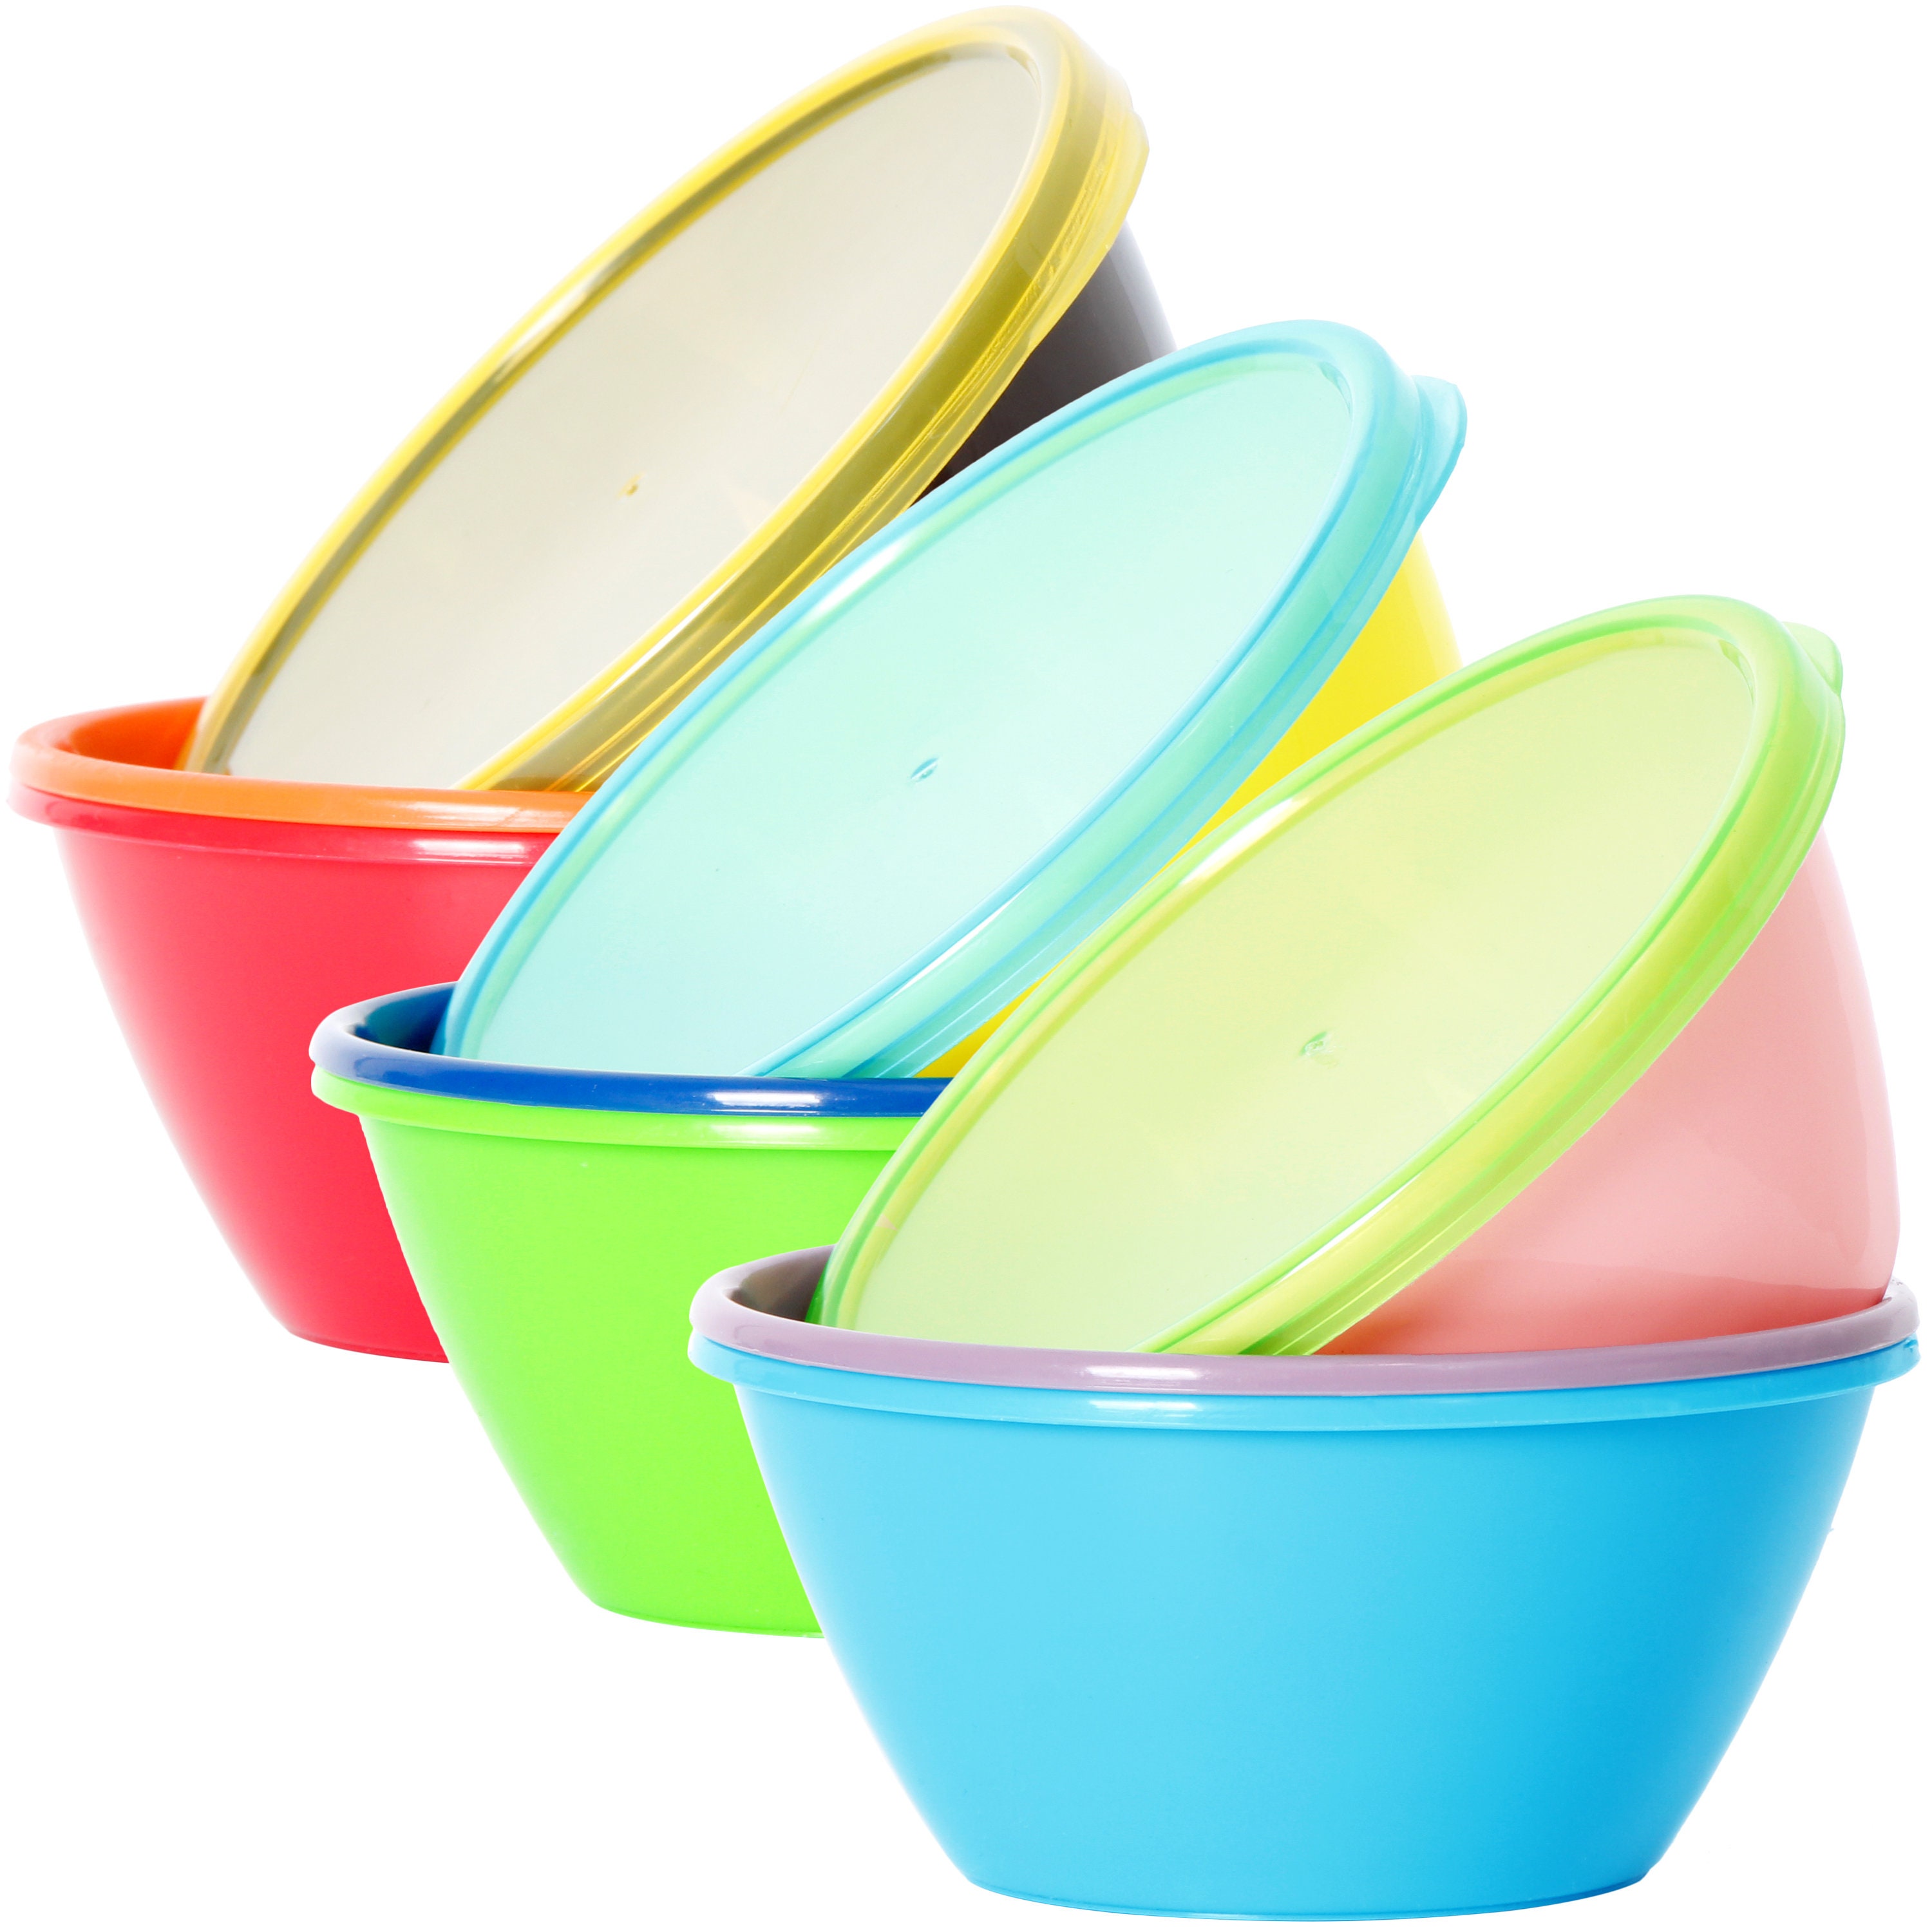 Youngever 50 Ounce Plastic Bowls, Large Cereal Bowls, Large Soup Bowls, Set of 9 (9 Rainbow Colors)